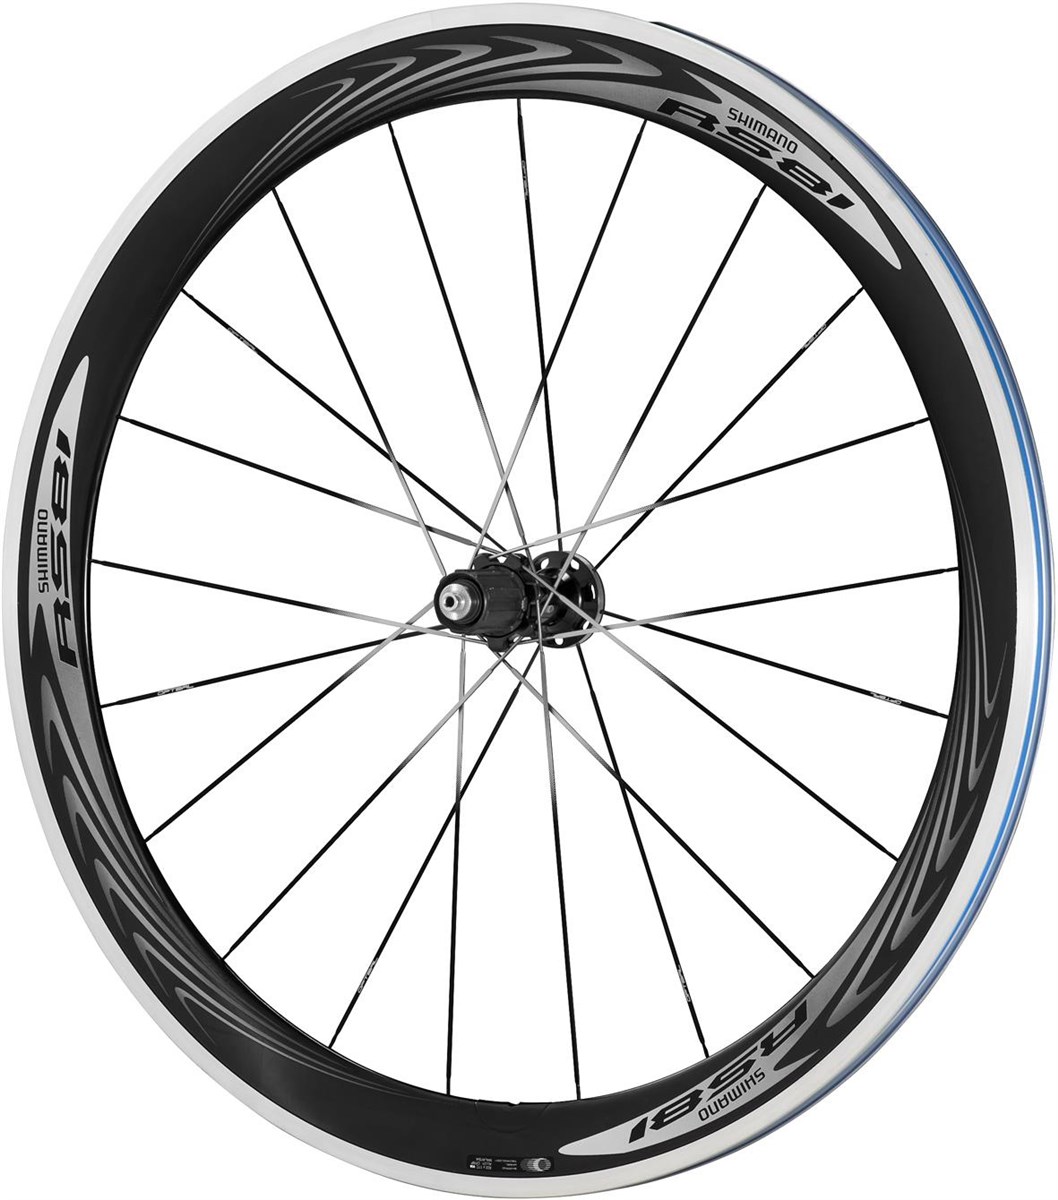 Shimano WH-RS81-C50-CL Wheel - Carbon Clincher - 50mm - Pair product image